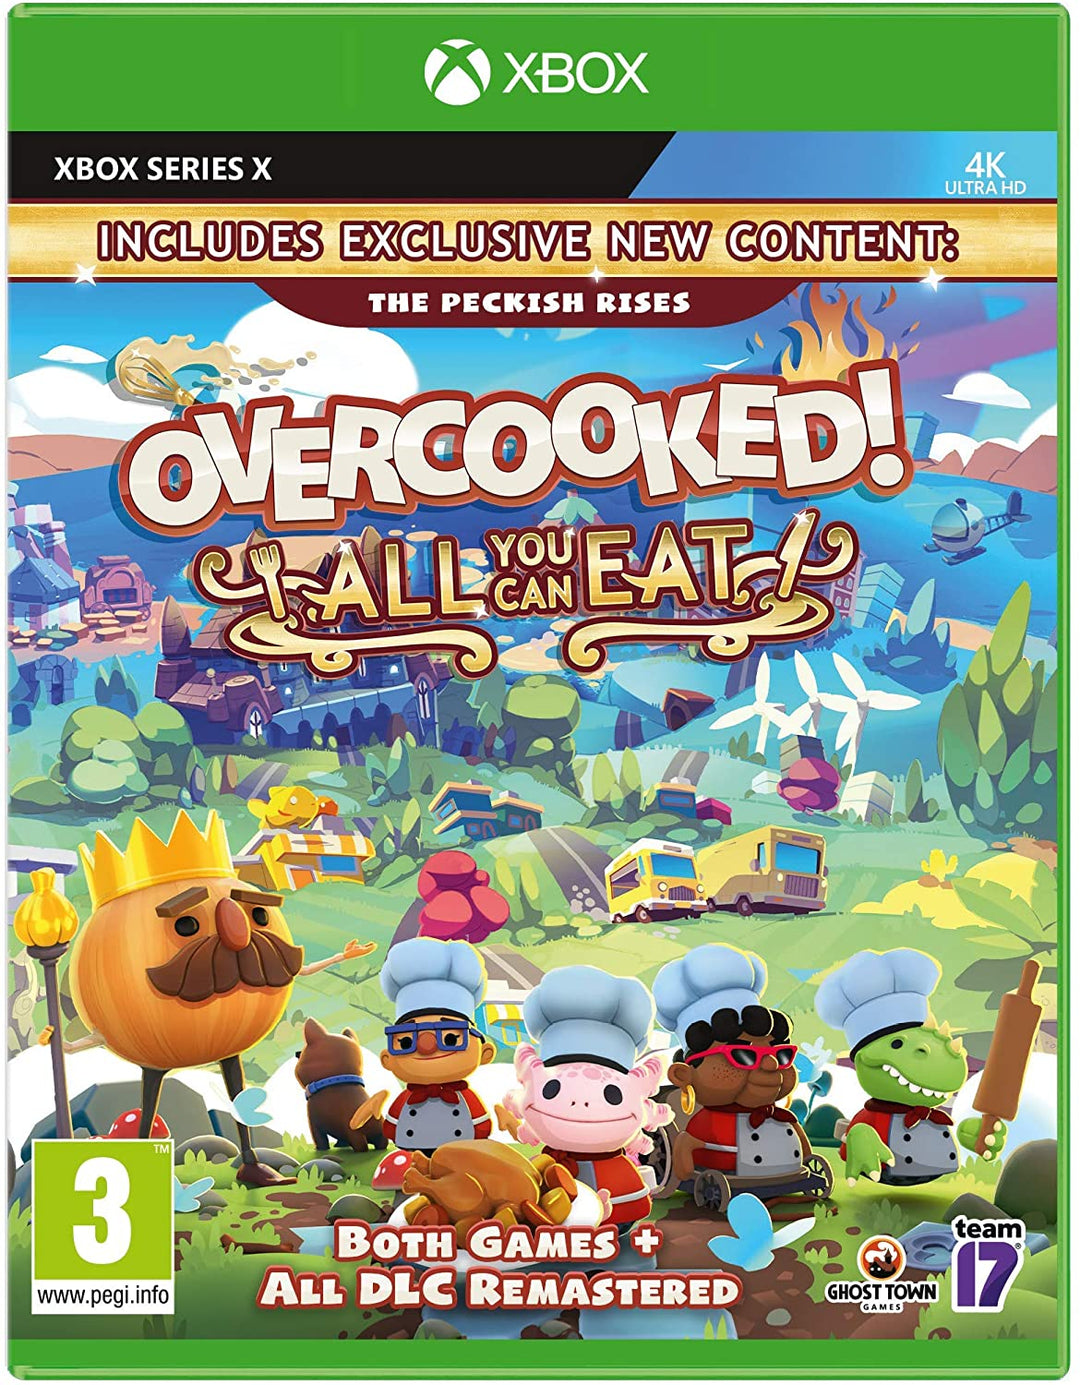 Verkocht! All You Can Eat (Xbox Series X)